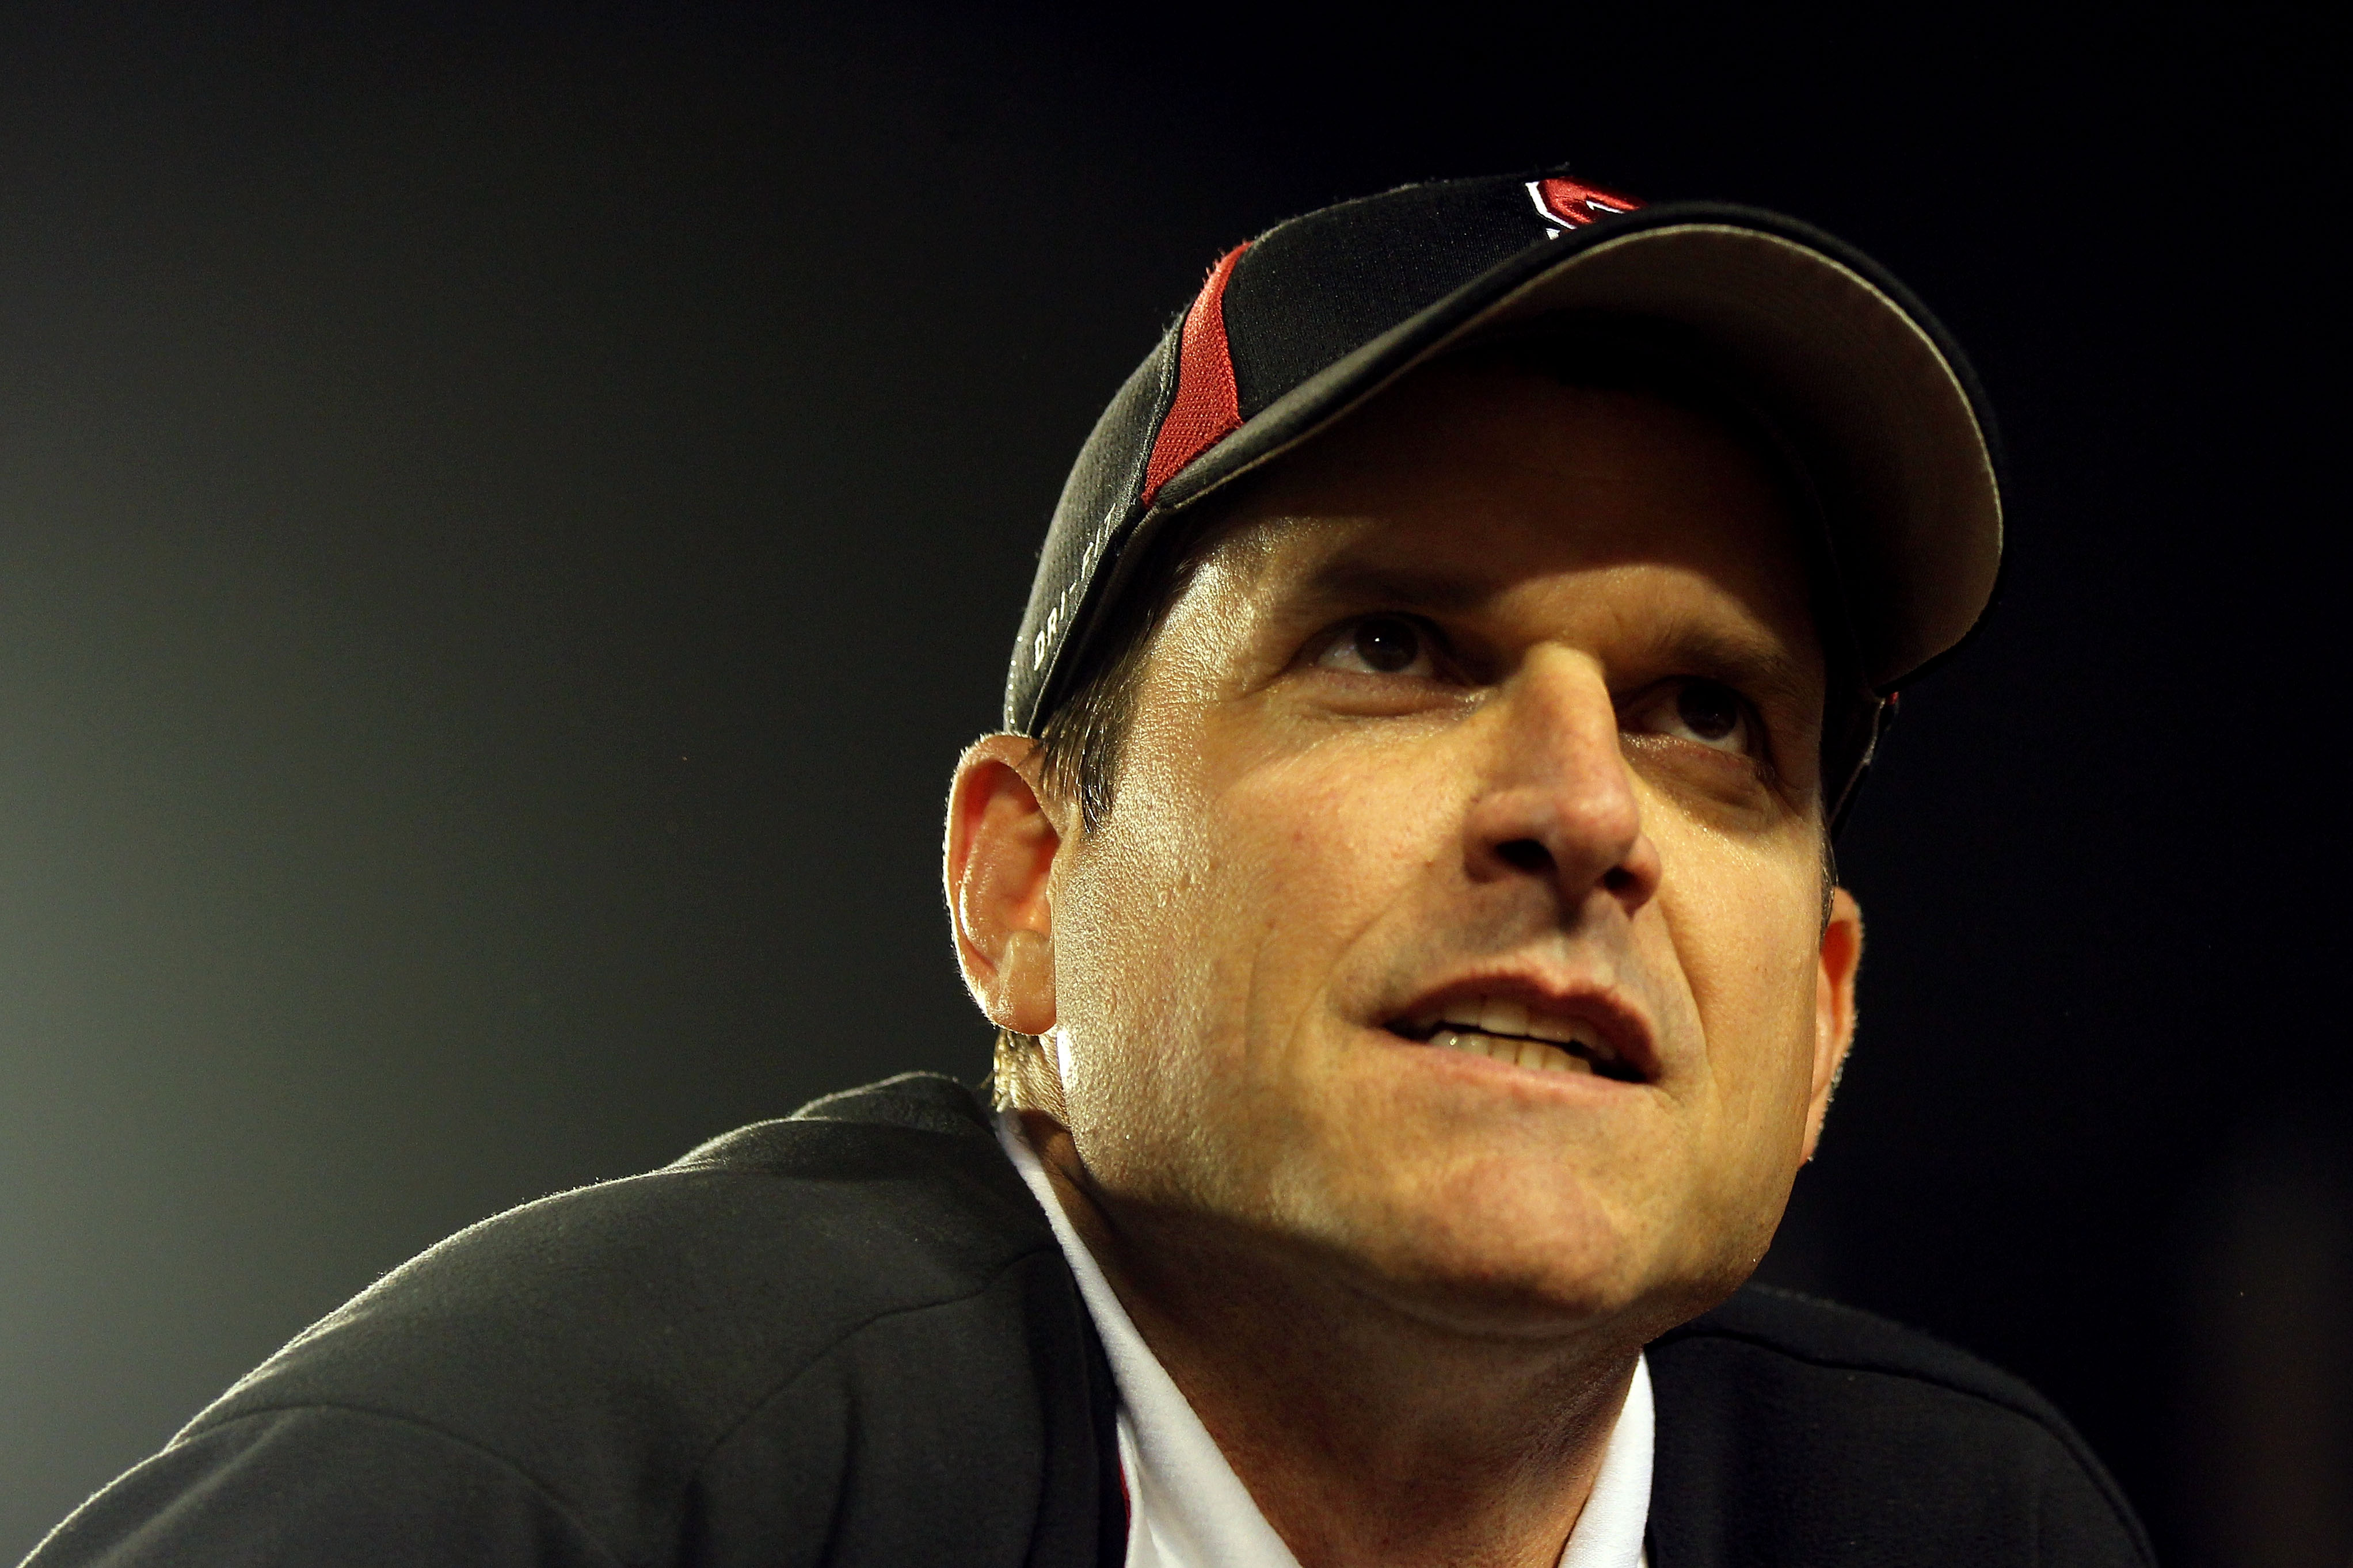 MIAMI, FL - JANUARY 03: Head coach Jim Harbaugh of the Stanford Cardinal looks on after Stanford won 40-12 against the Virginia Tech Hokies during the 2011 Discover Orange Bowl at Sun Life Stadium on January 3, 2011 in Miami, Florida. (Photo by Mike Ehrma